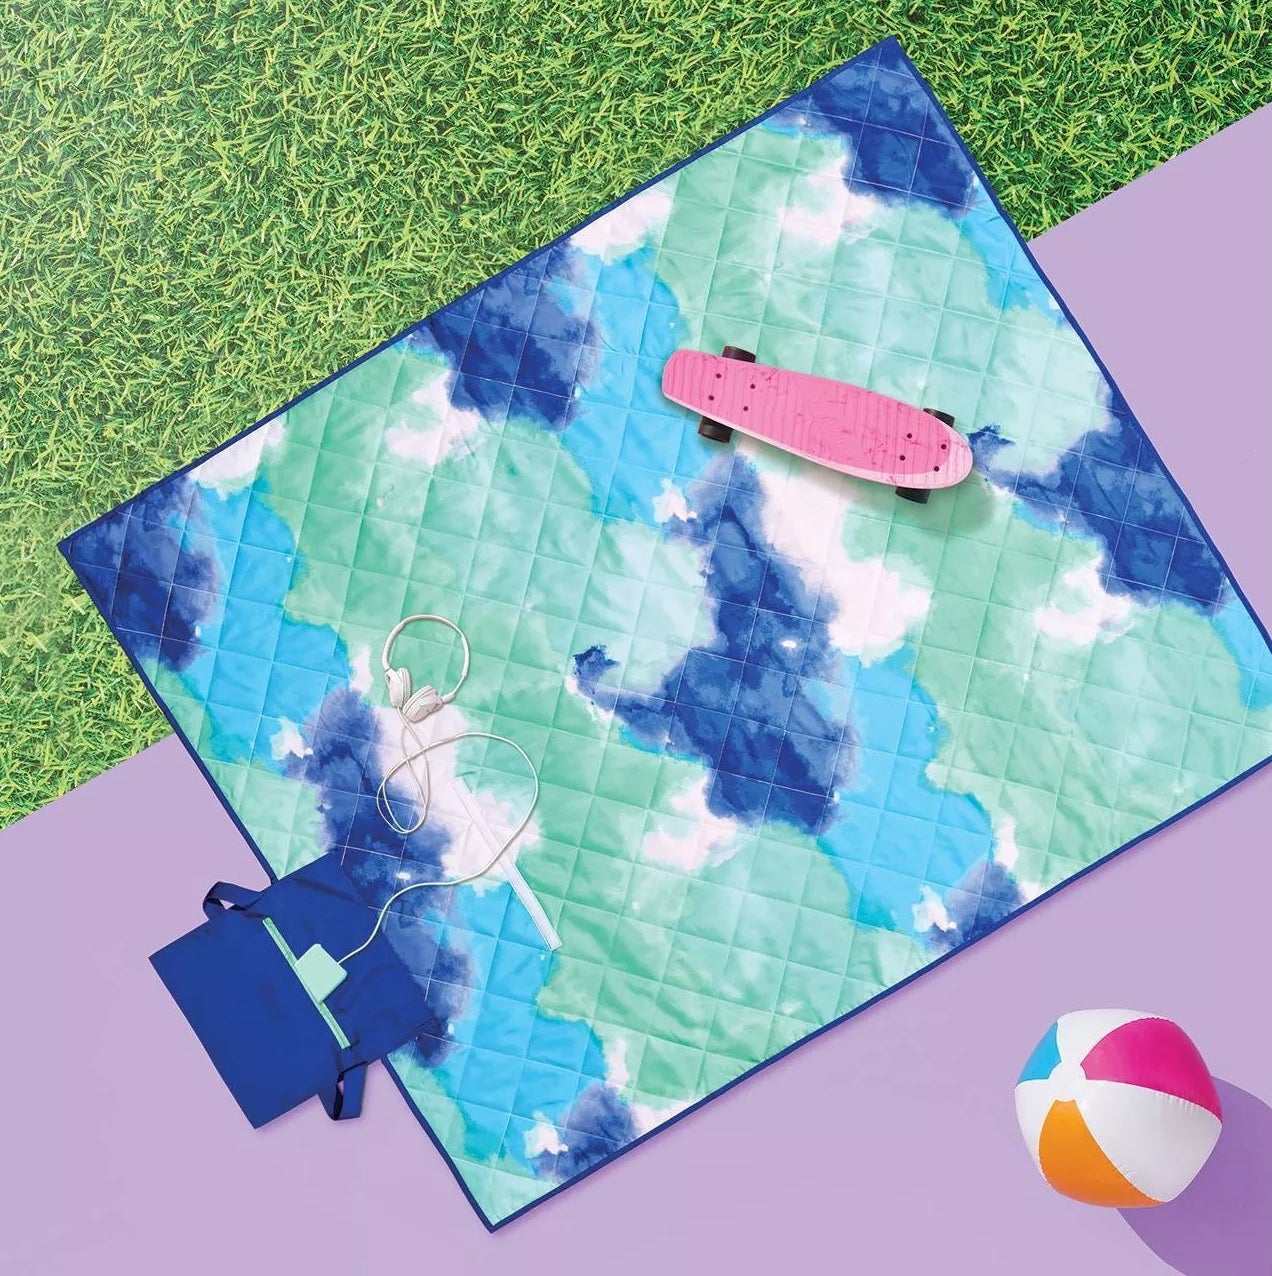 The quilted blanket with a separate compartment for your belongings on the grass